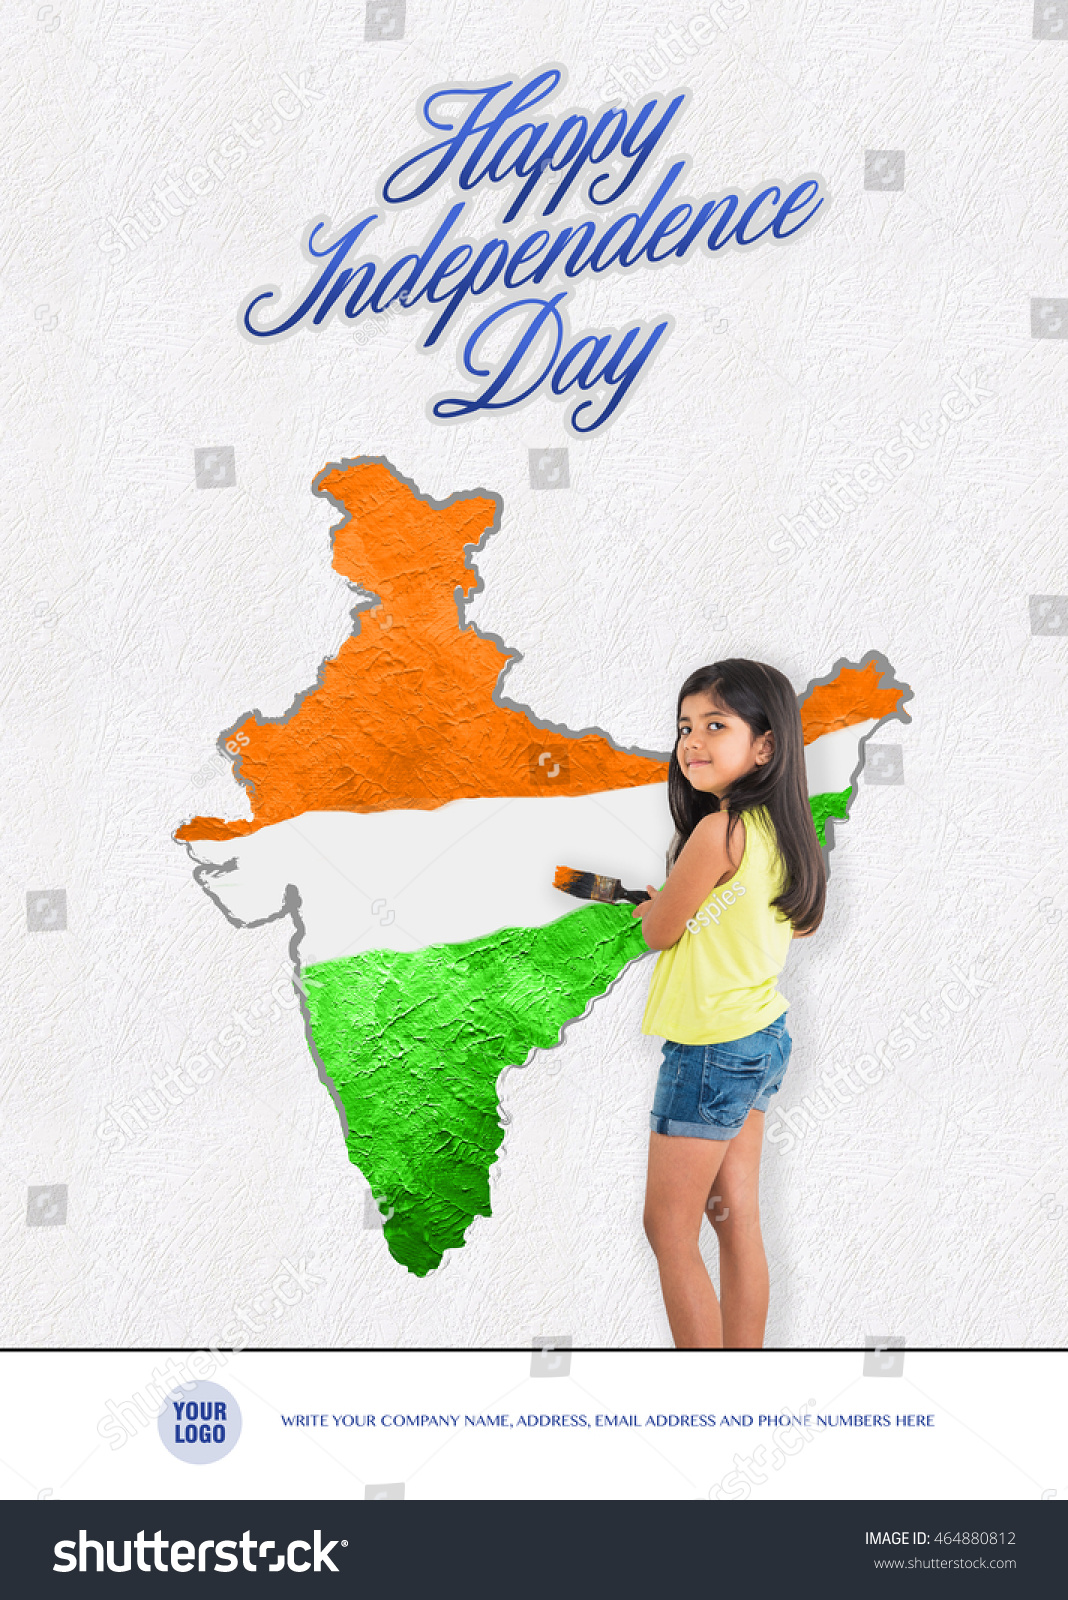 Cute Little Girl Painting Indian Map On Wall For Royalty Free Stock Photo 464880812 Avopix Com